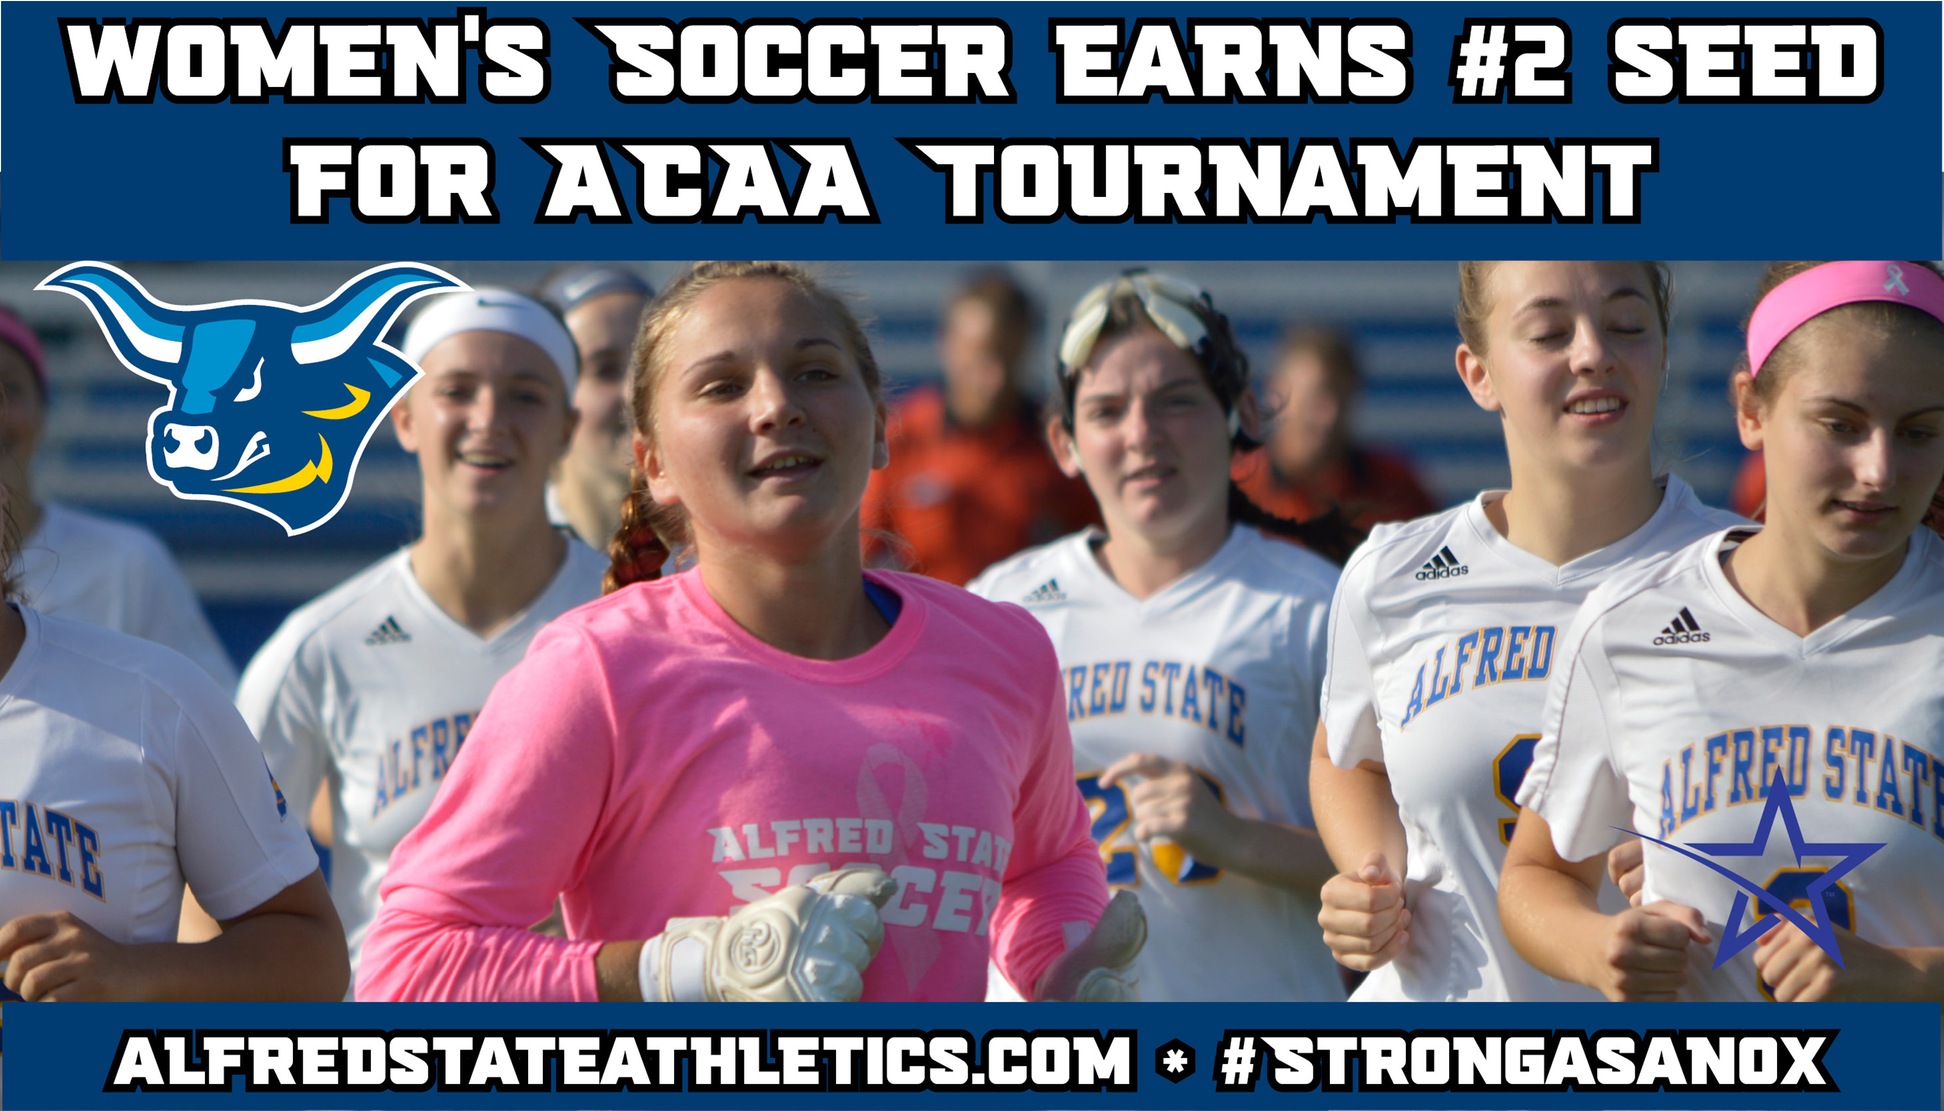 Women's Soccer Earns #2 Seed for ACAA Tournament